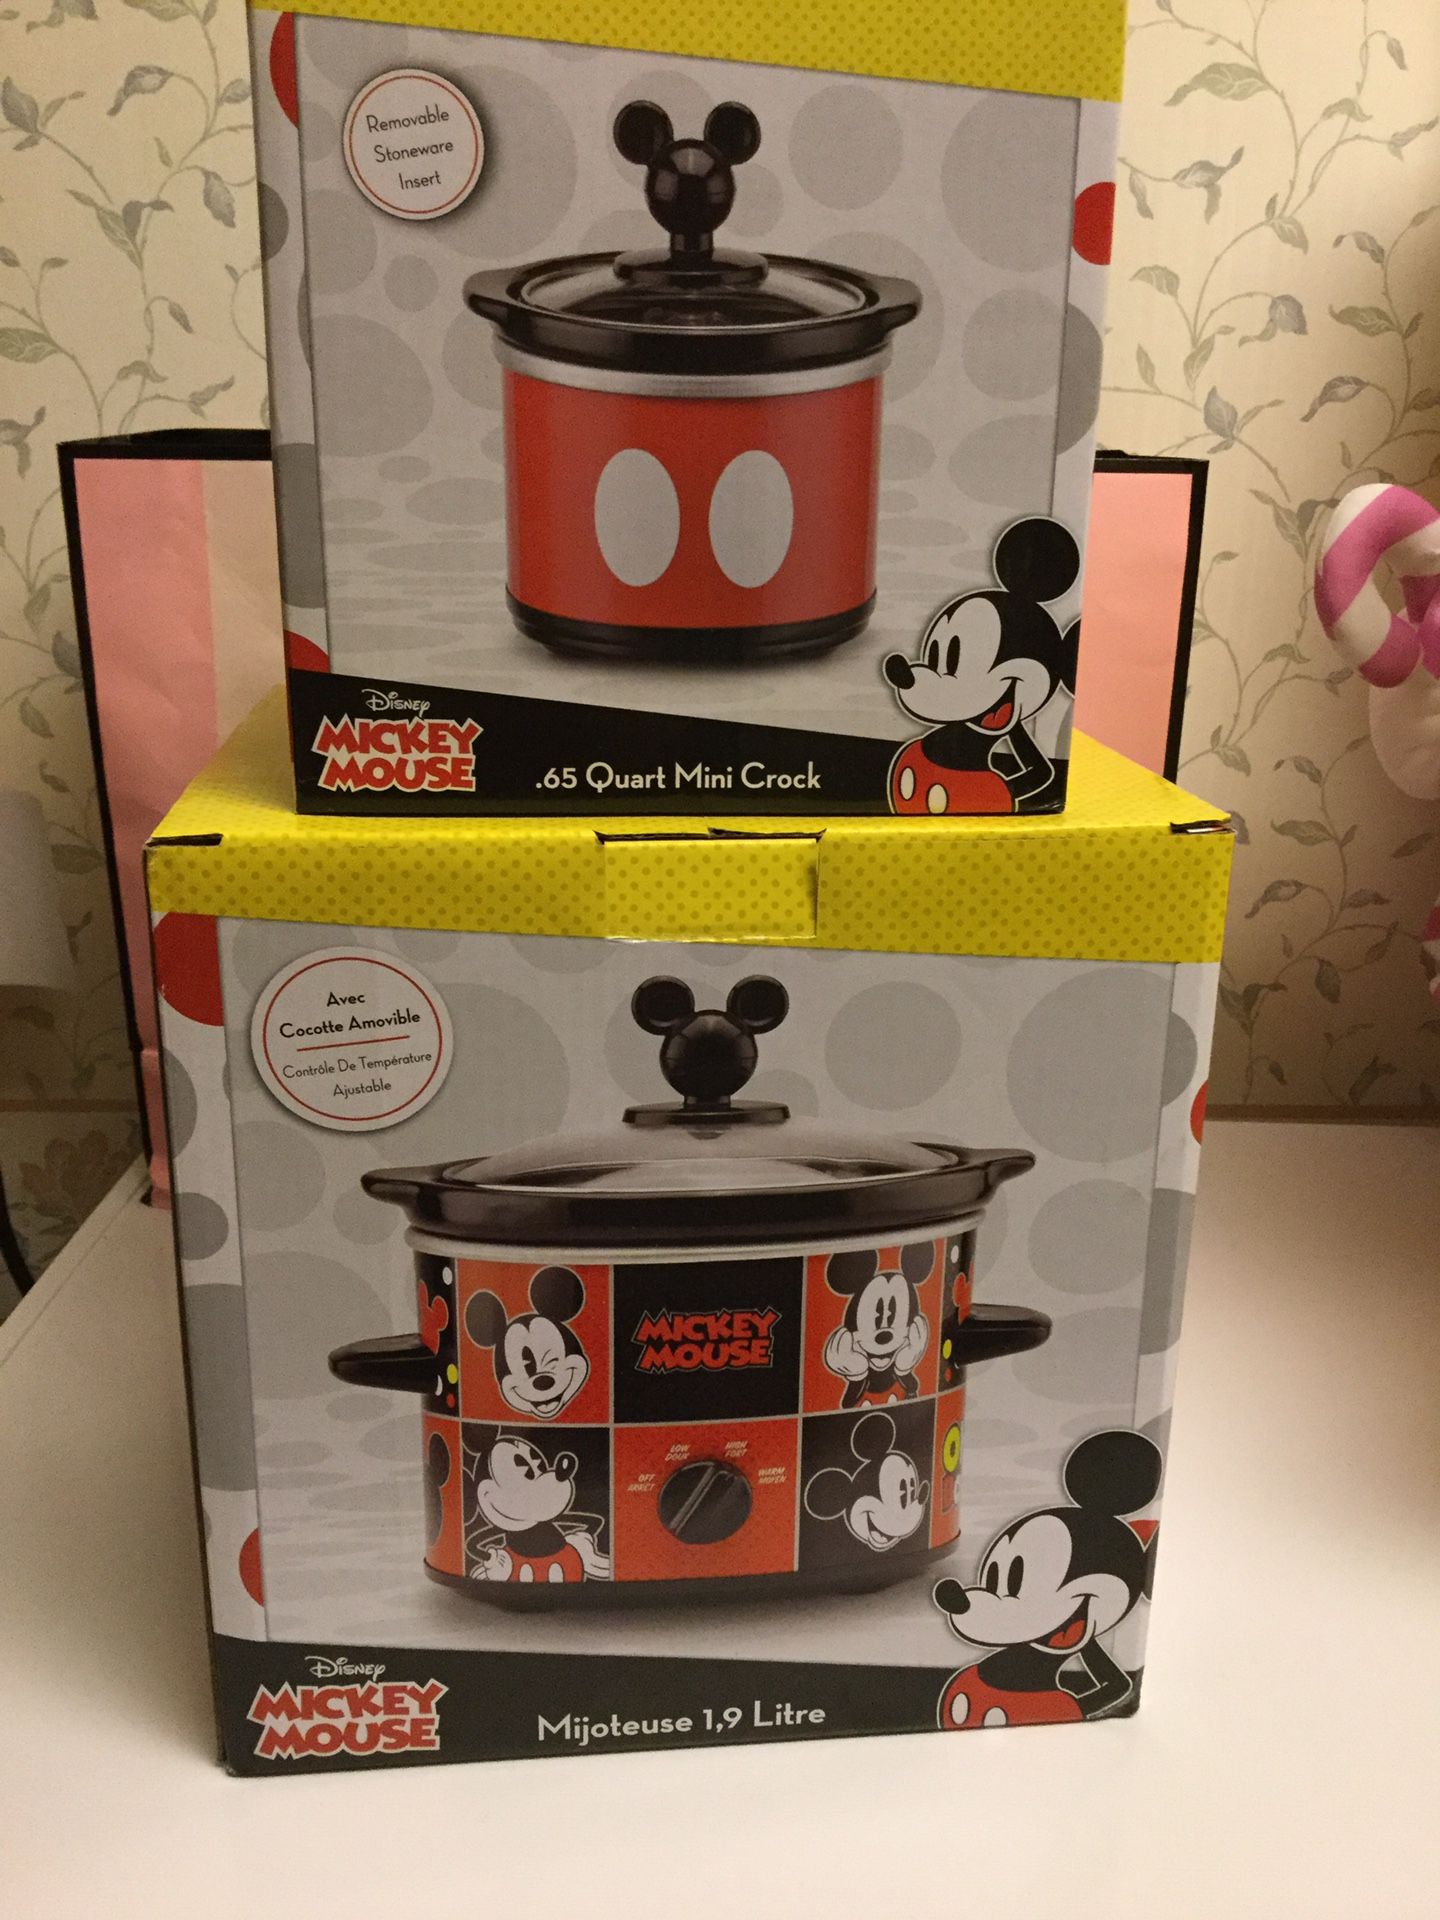 Micky mouse slow cooker